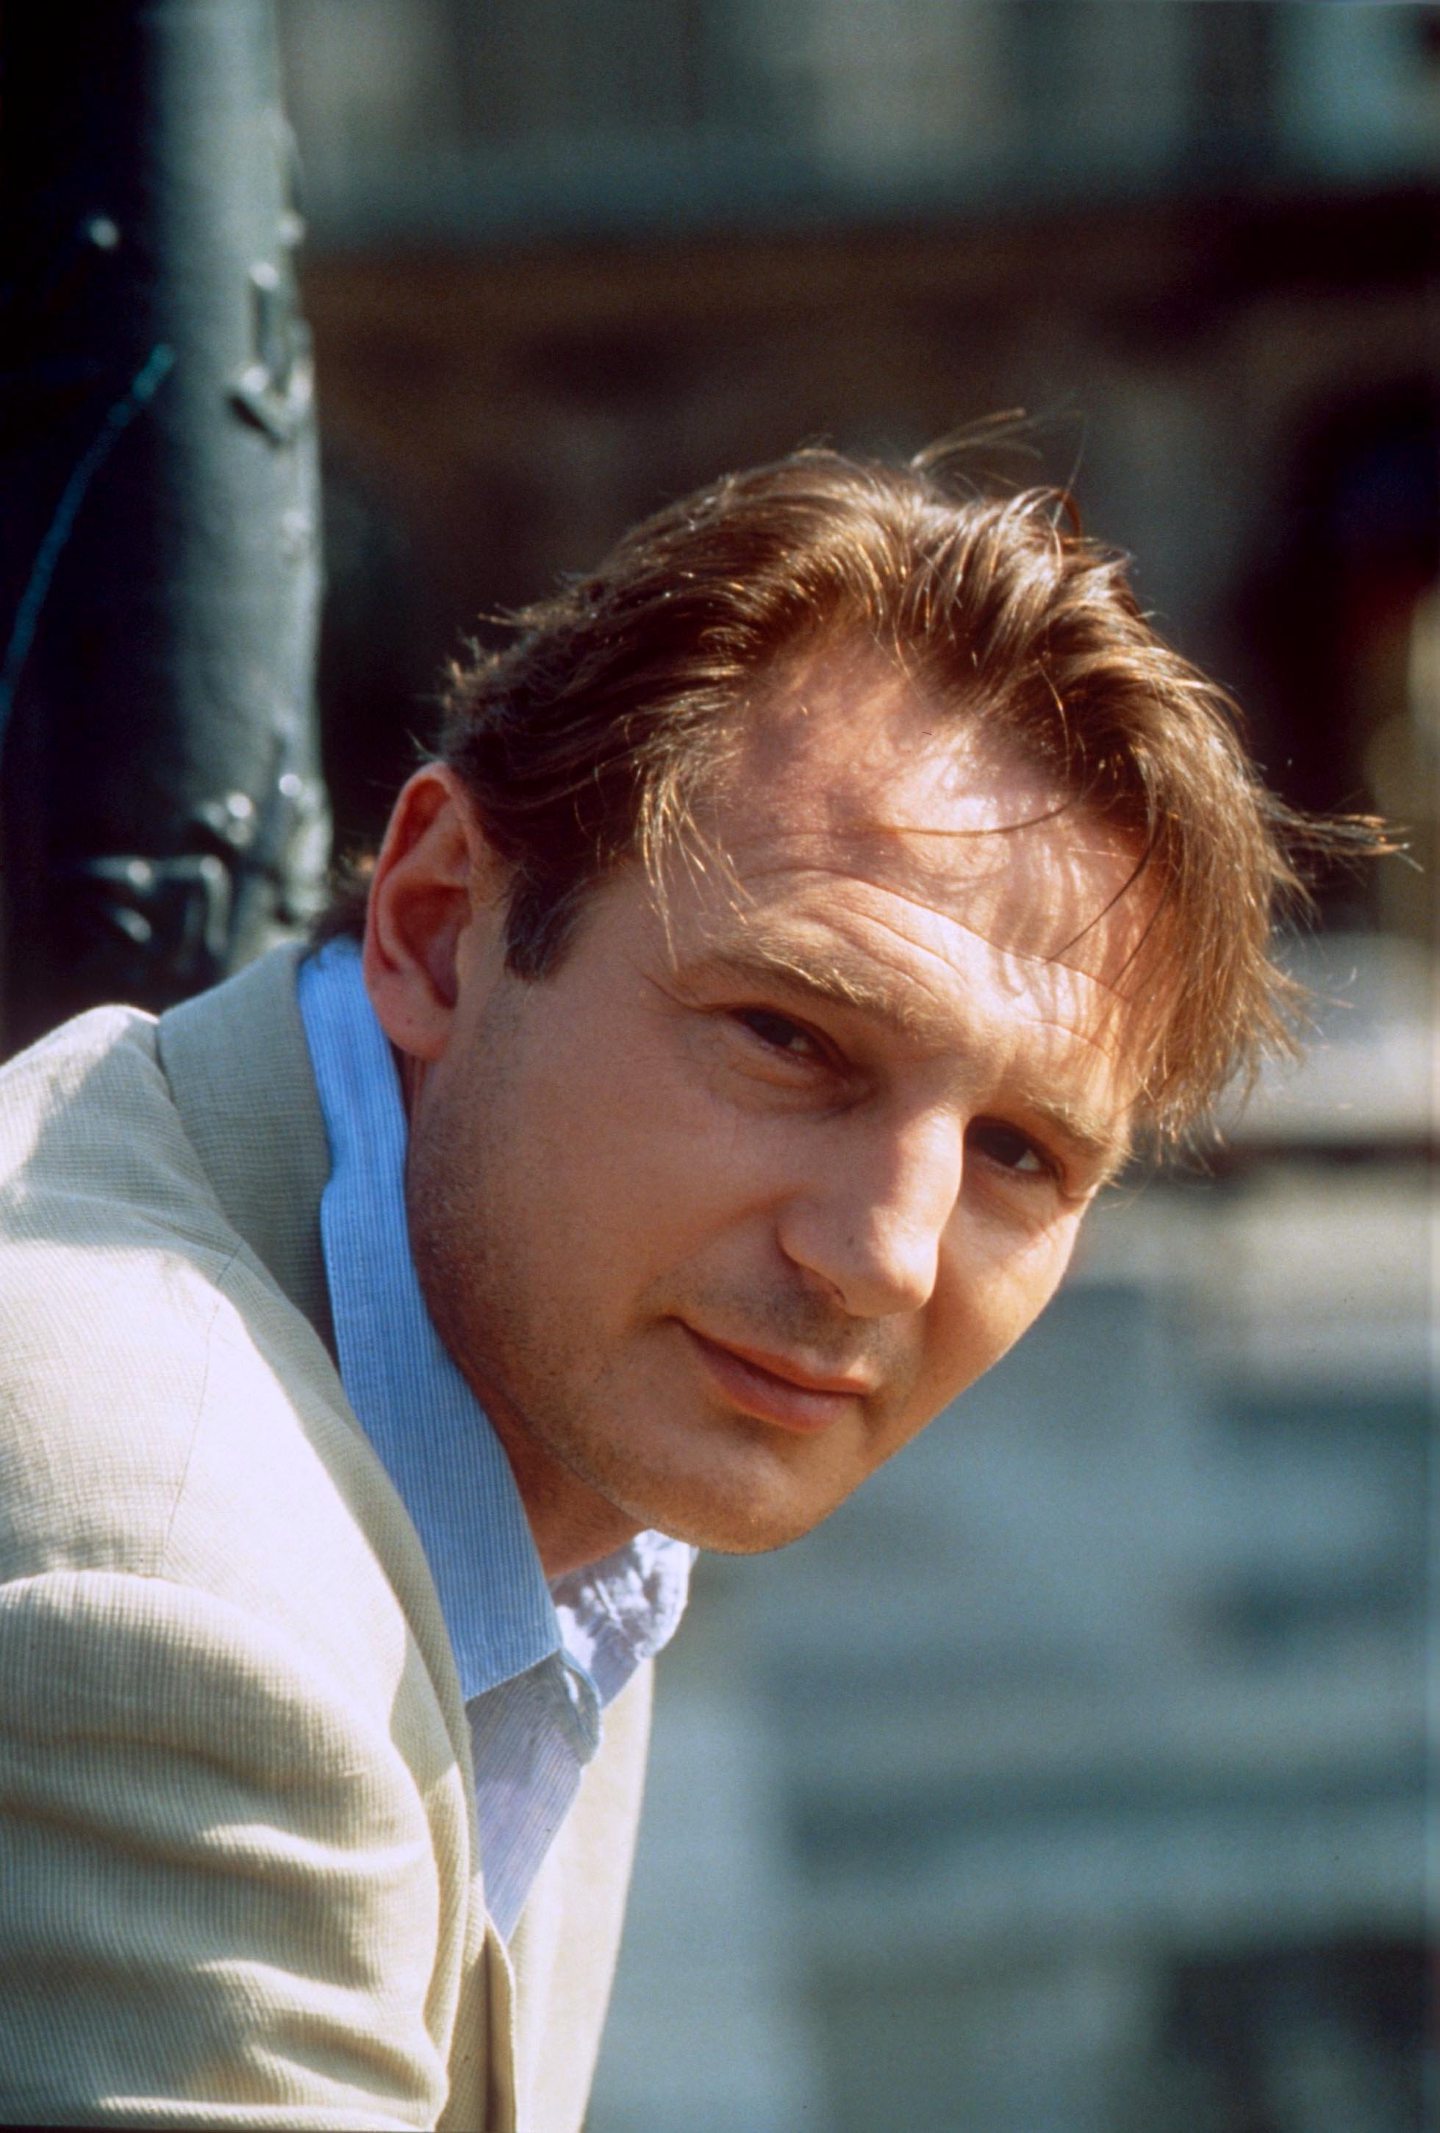 A head shot of Liam Neeson, who was filming Rob Roy and attended the Ice Factory.